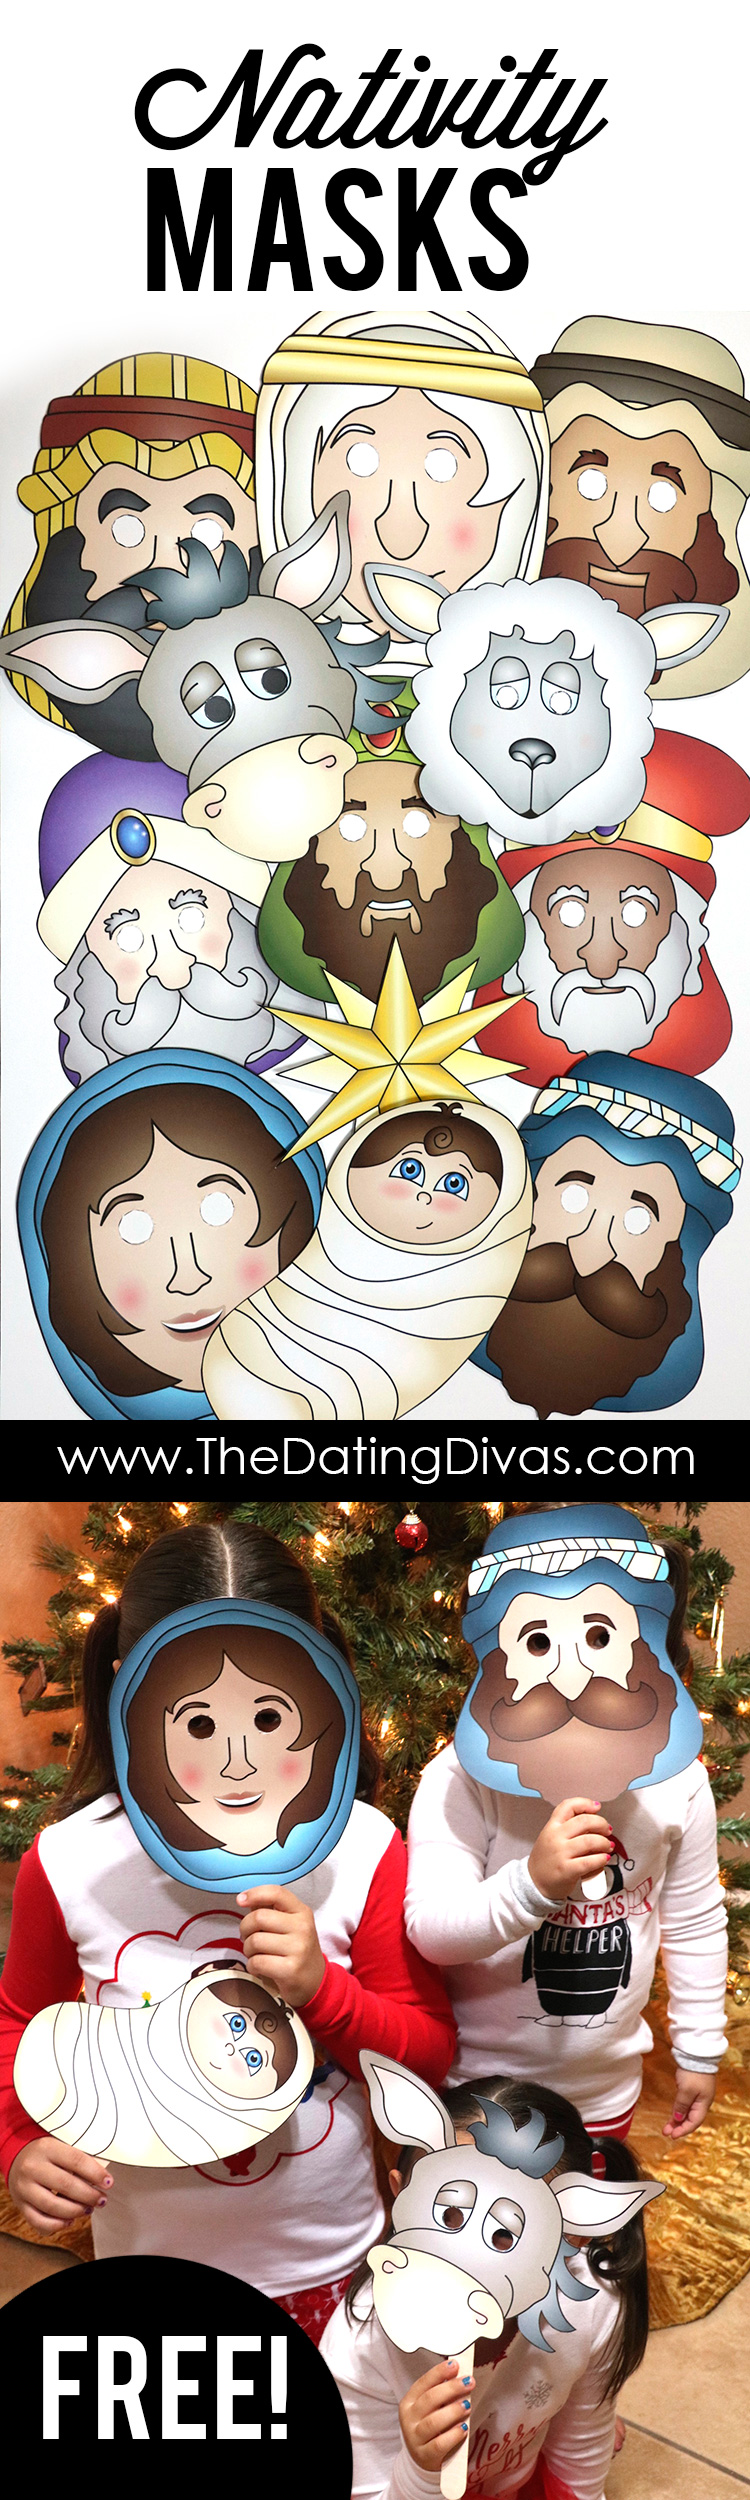 Free Printable Nativity Masks to Act Out the Nativity Story as a Family